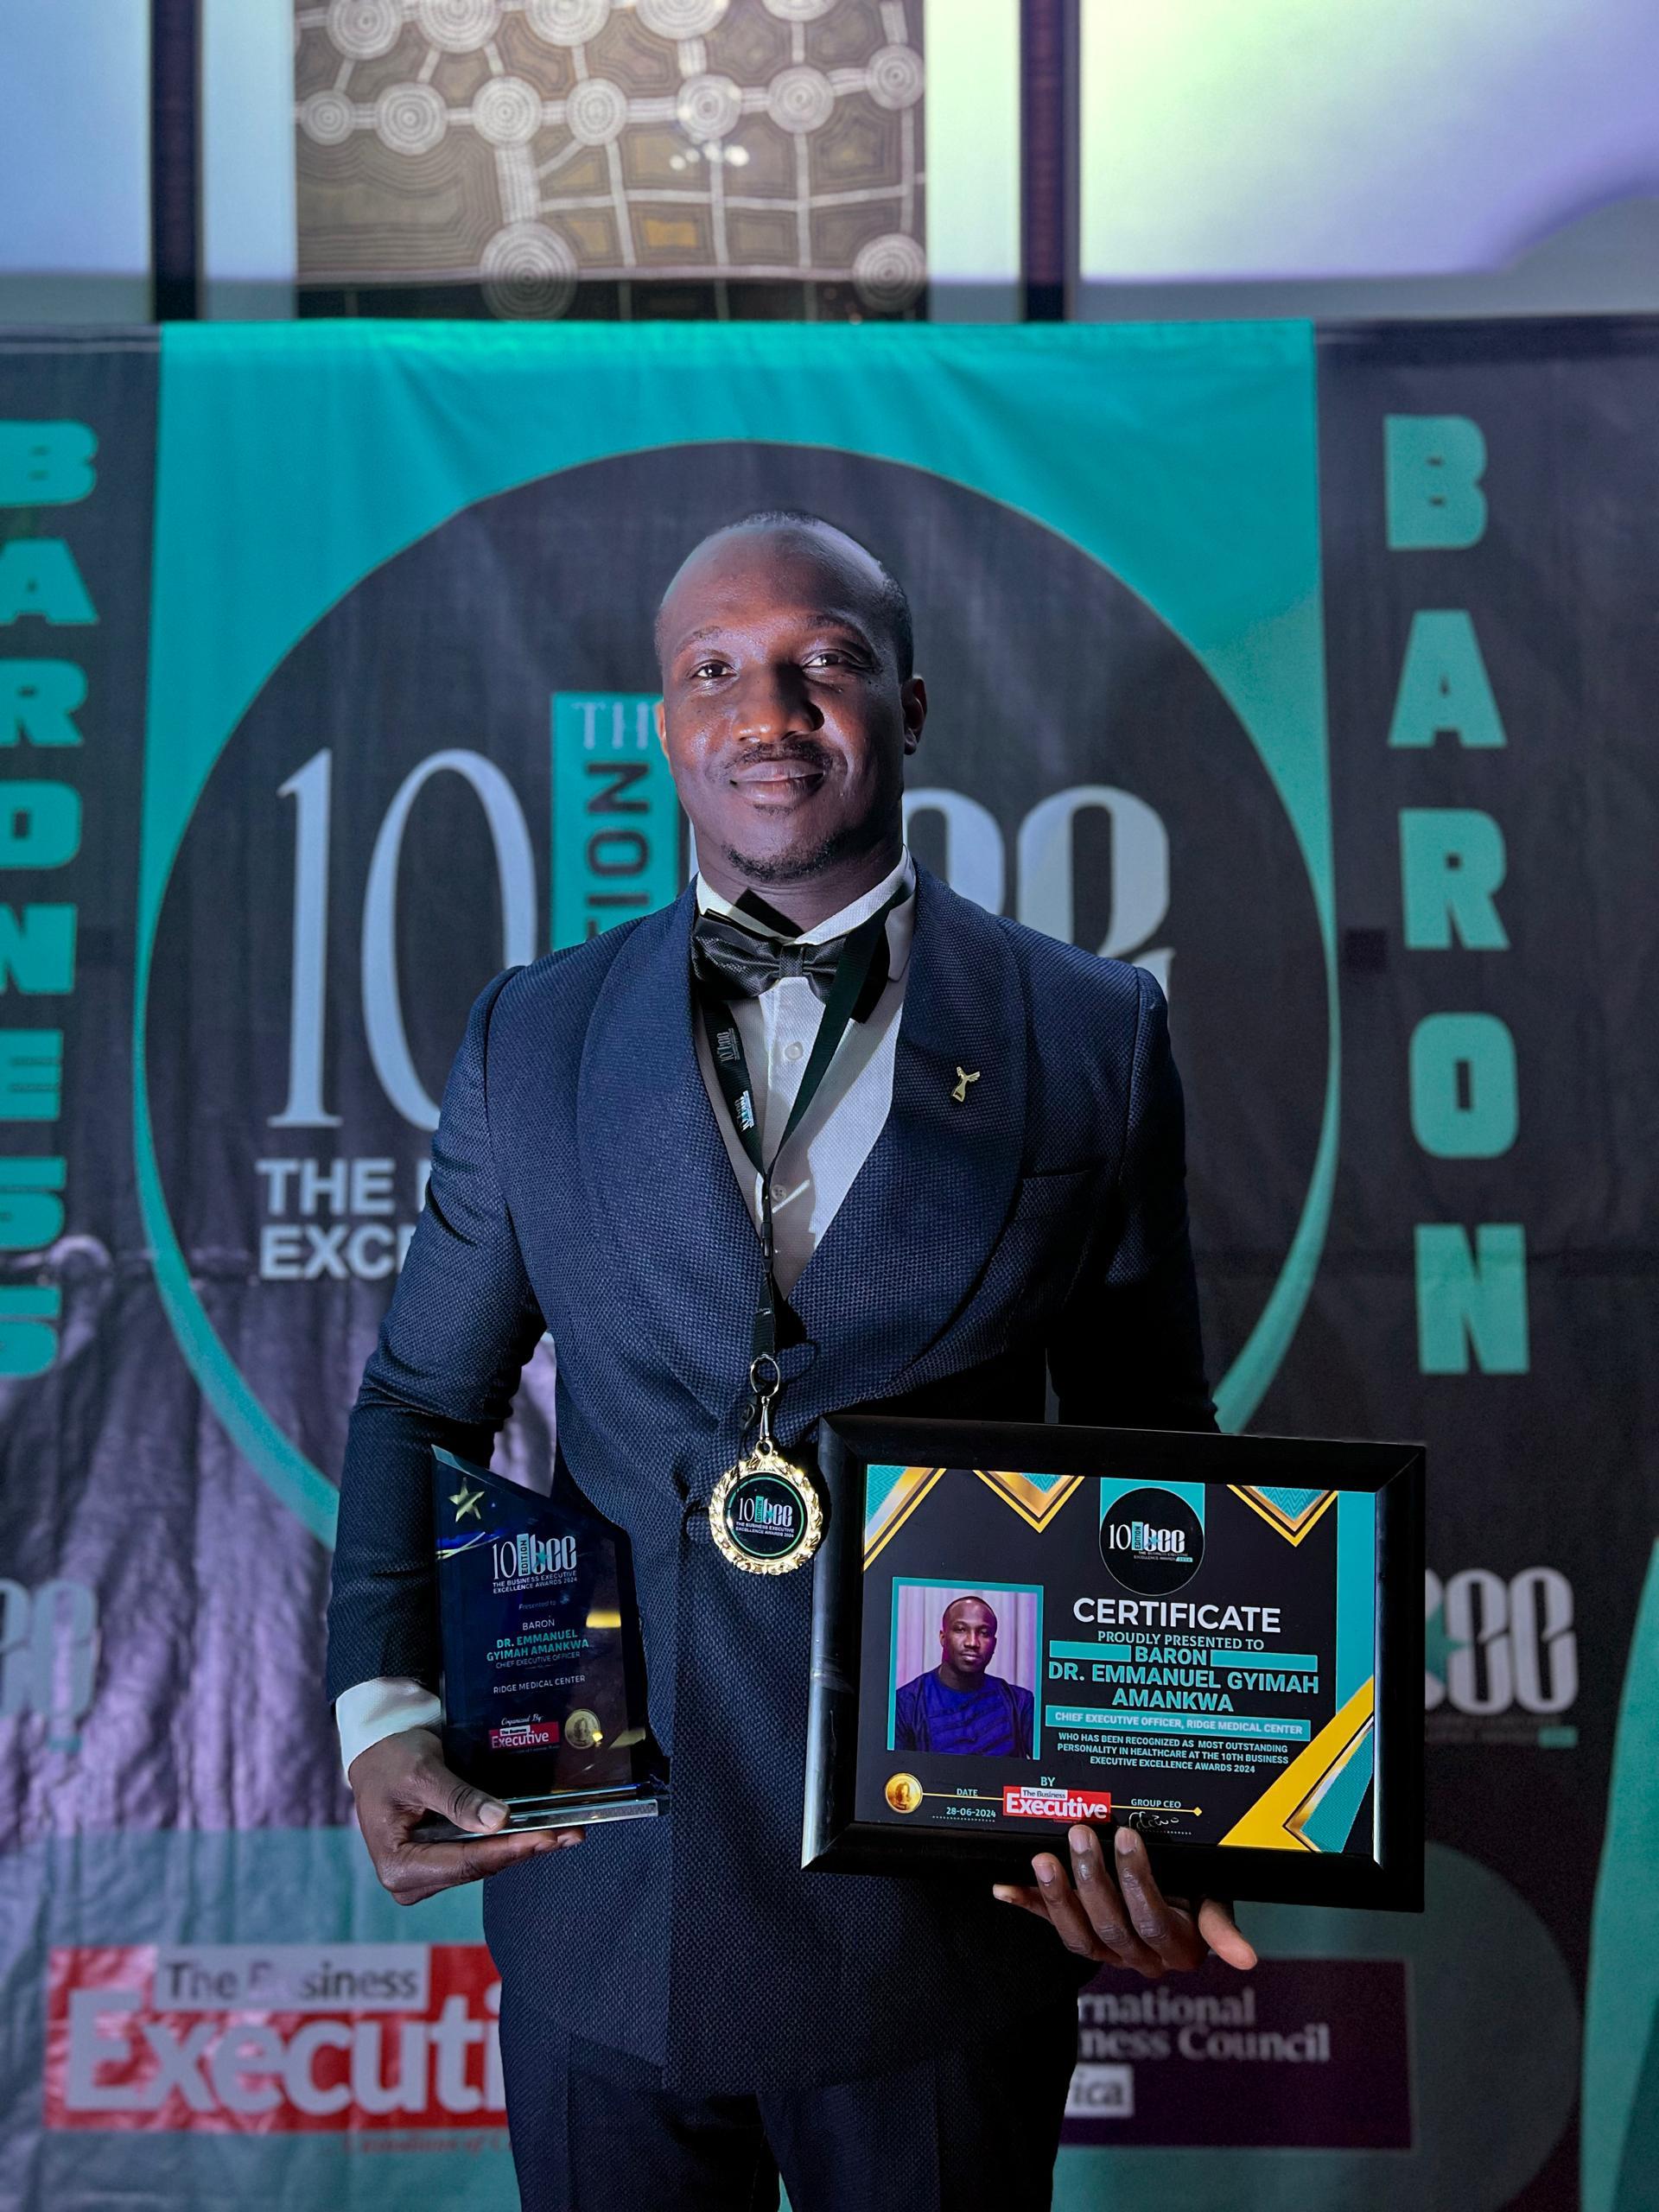 Ridge Medical Centre CEO wins Ghana’s Most Oustanding Personality in Healthcare